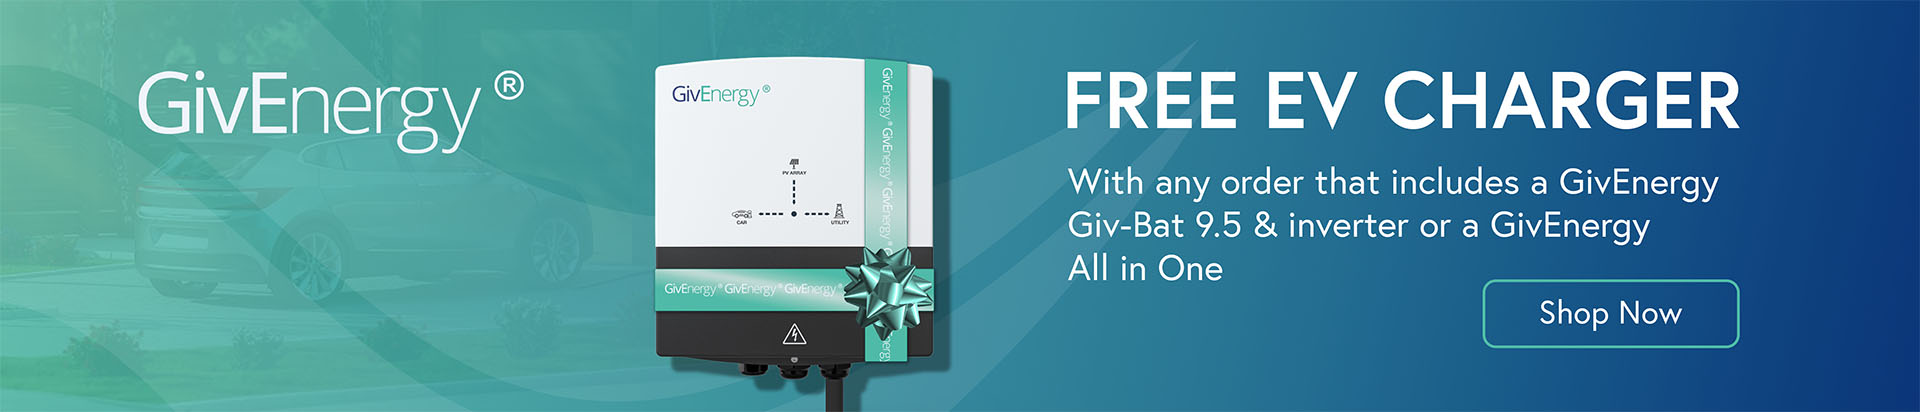 Free GivEnergy EV charger at CCL